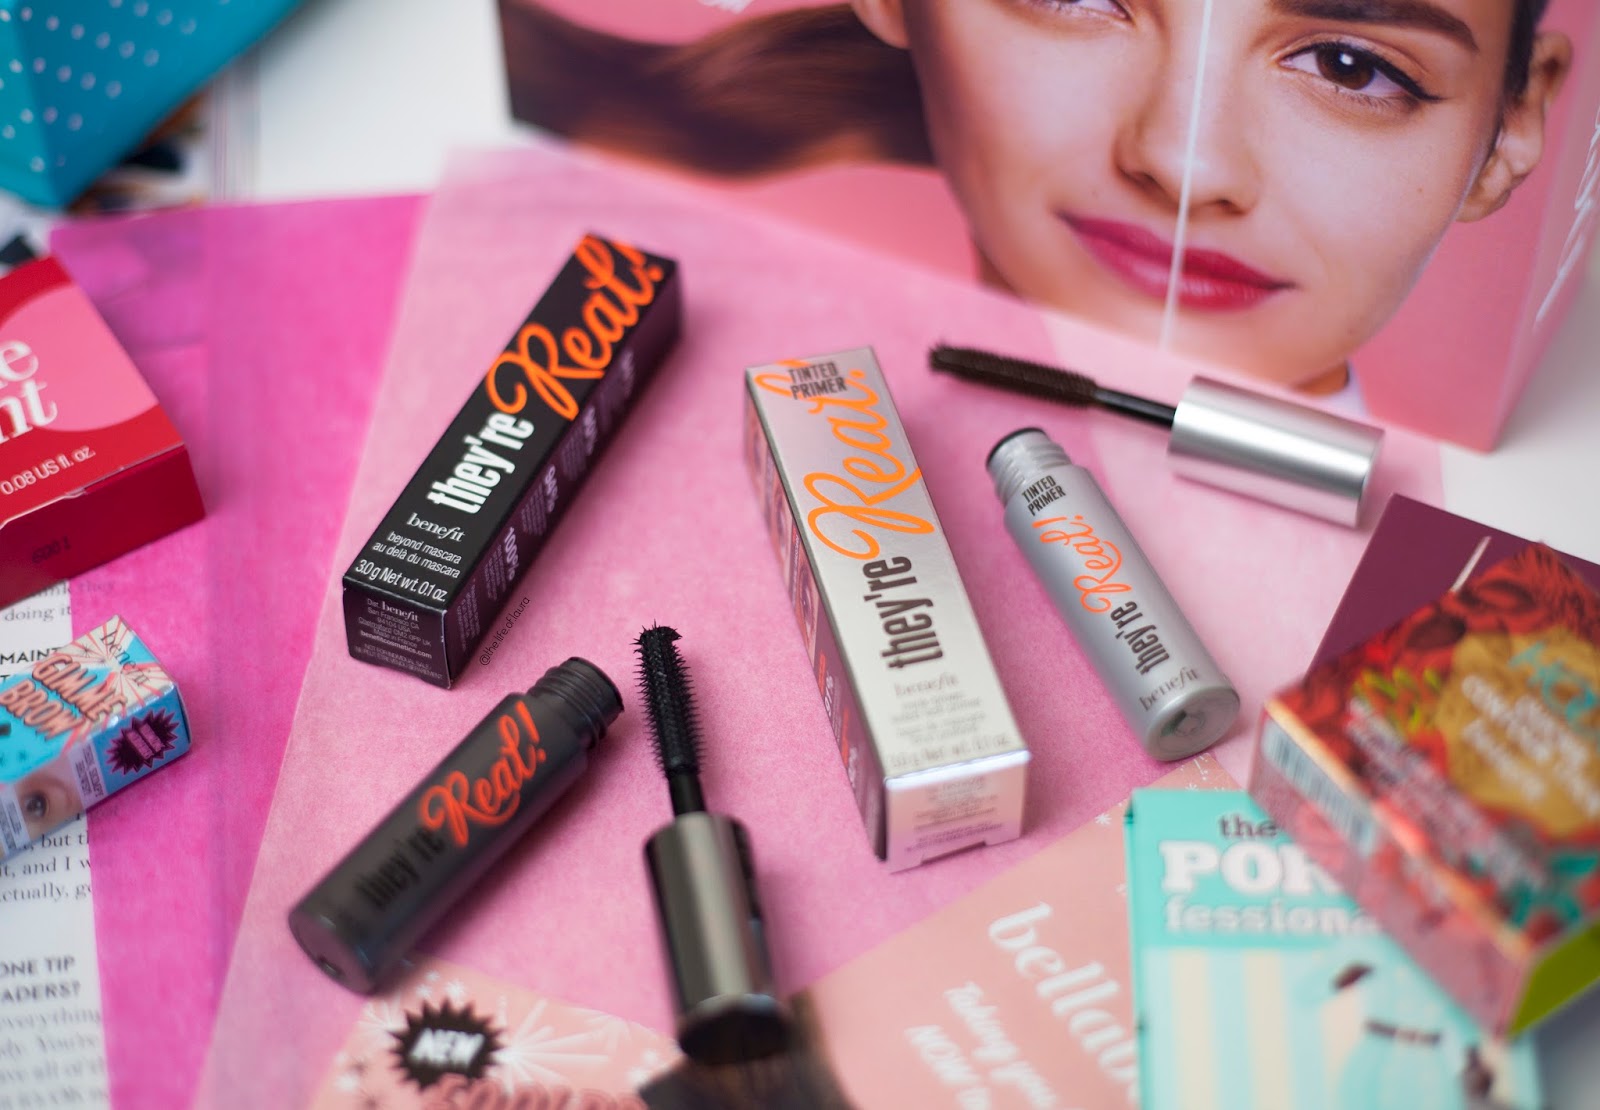 Bellabox x Benefit They're Real Primer and Mascara